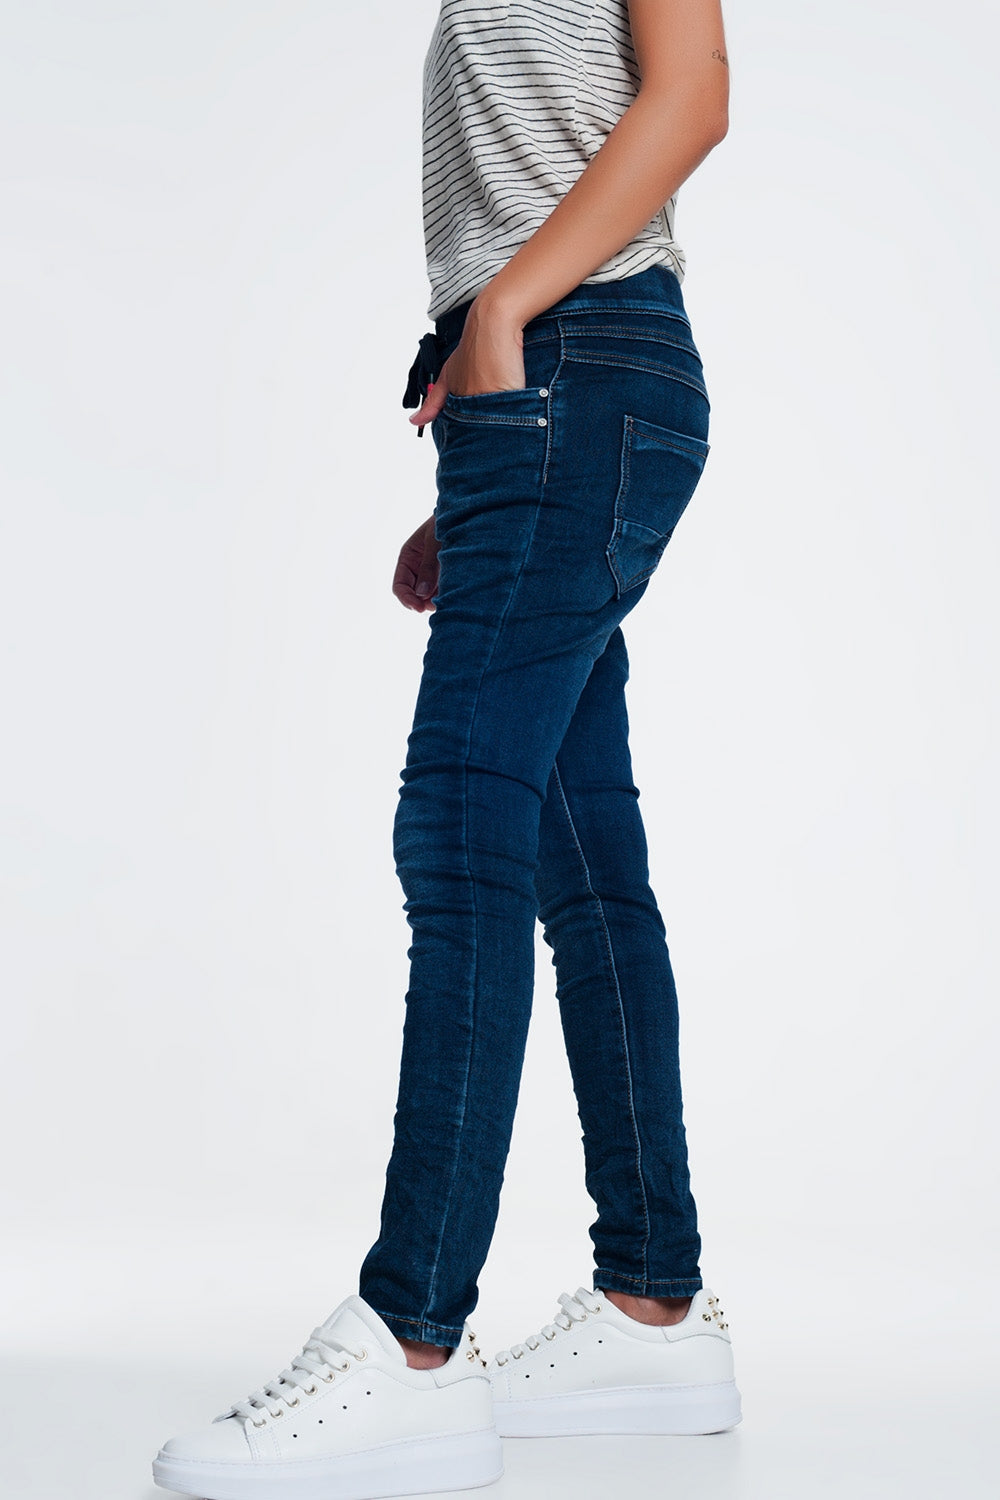 Relaxed sportspant jeans with draw cord Szua Store